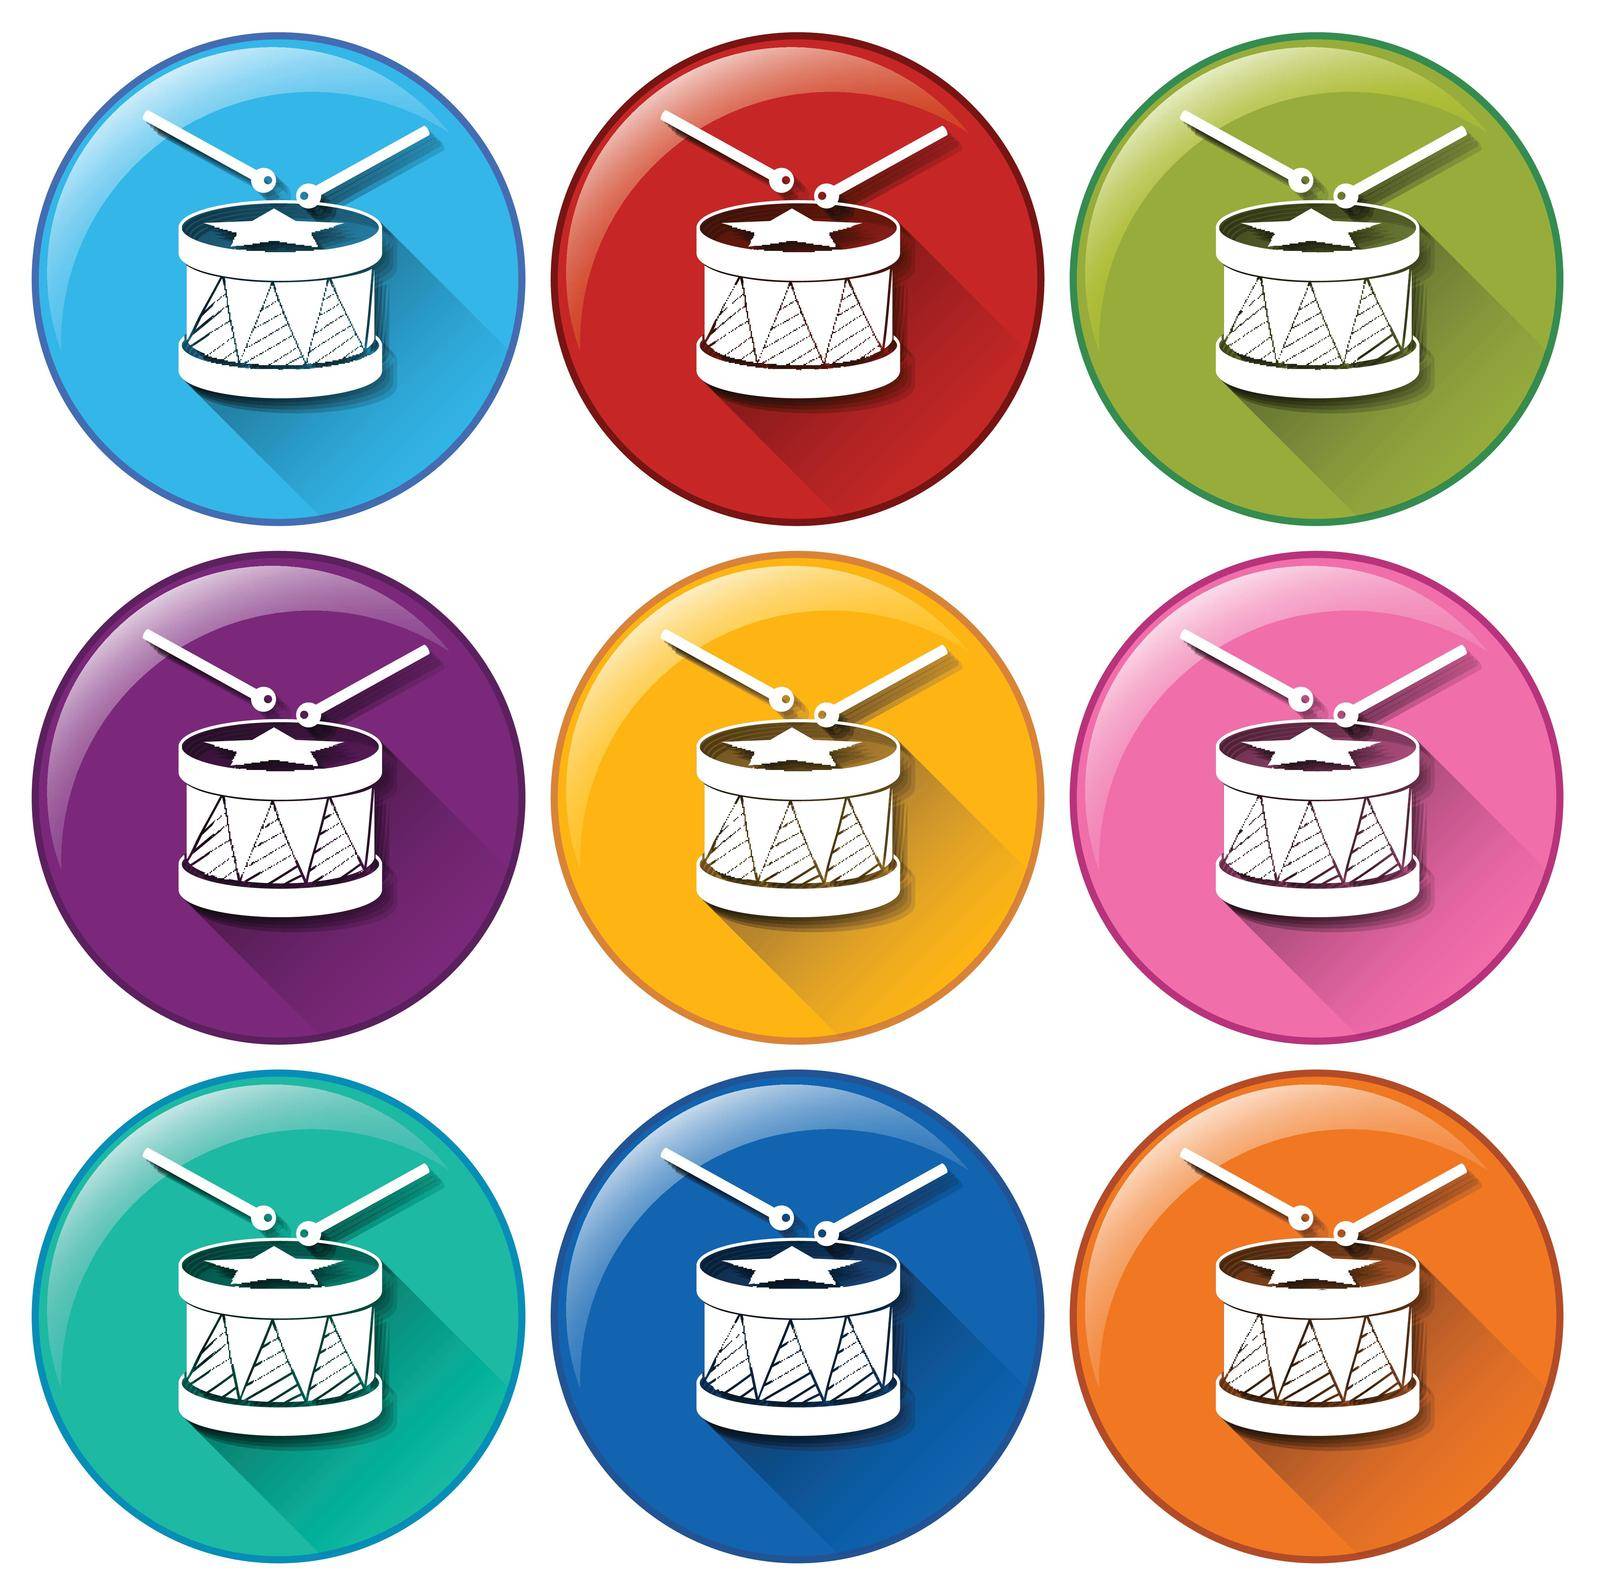 Illustration of the round icons with drum toys on a white background